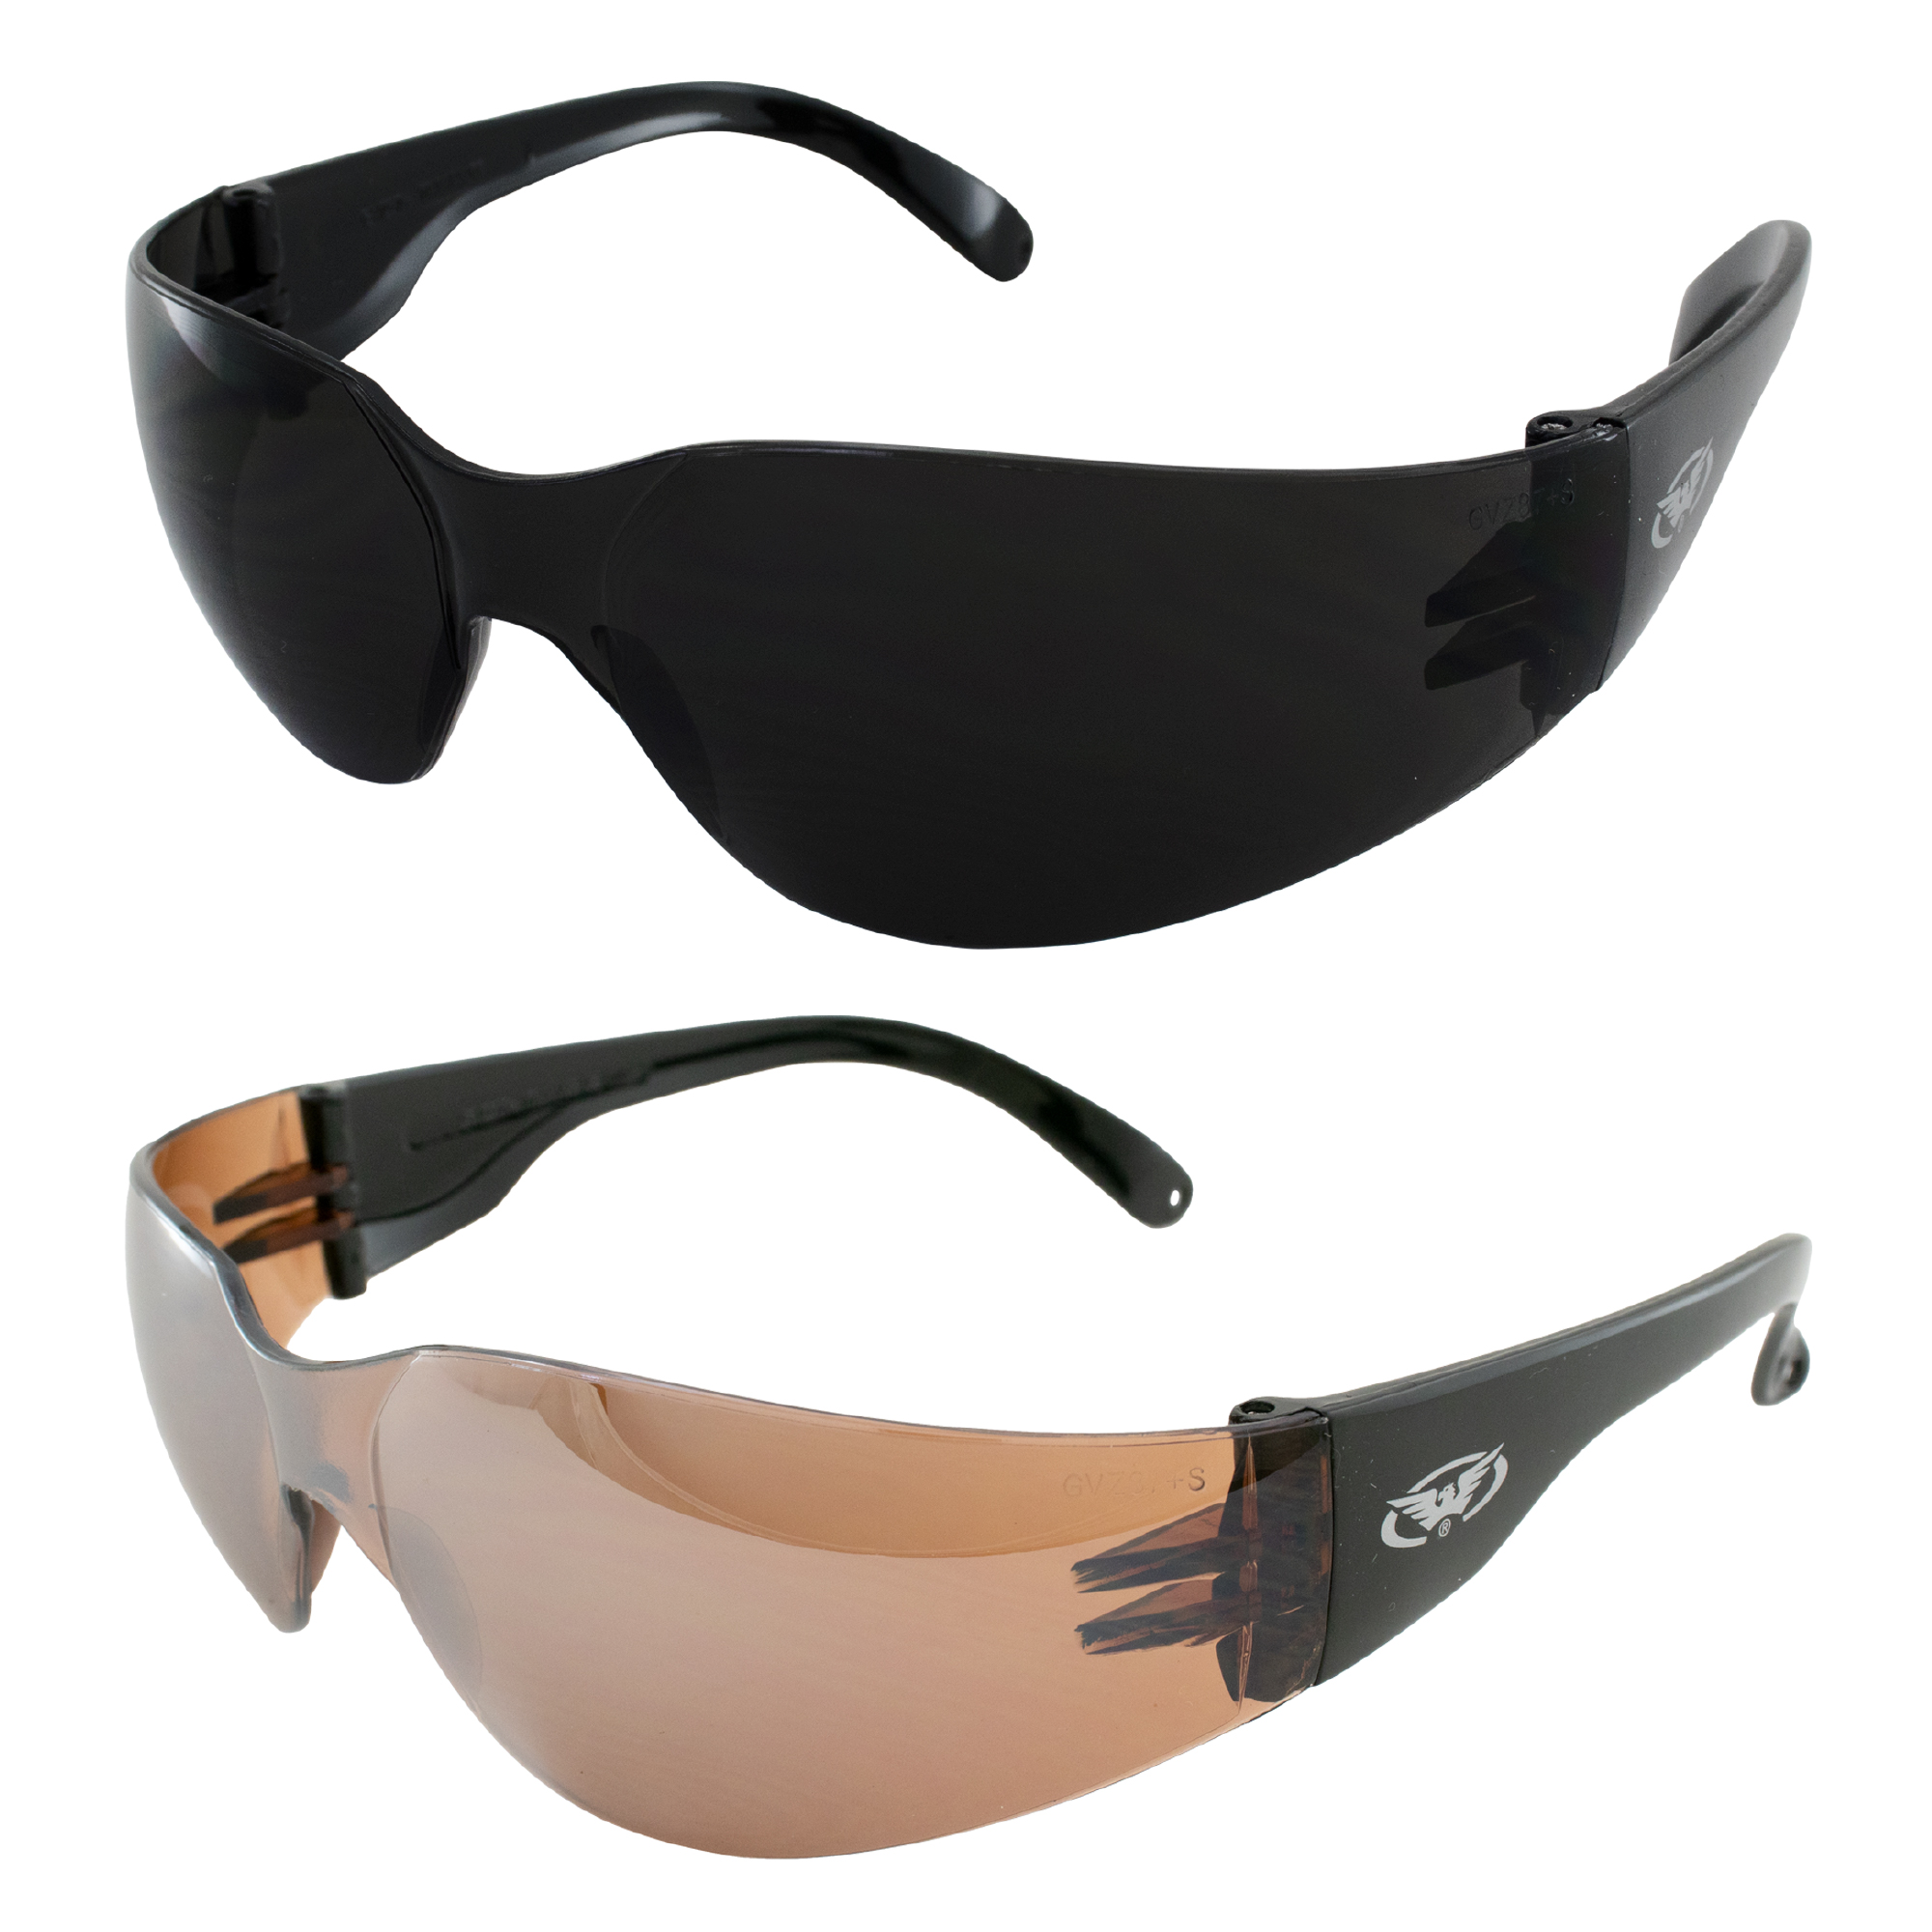 Two Pairs of Global Vision Rider Safety Motorcycle Riding Sunglasses Black Frames One Pair Super Dark Lens and One Pair Driving Mirror Lens ANSI Z87.1 - image 1 of 3